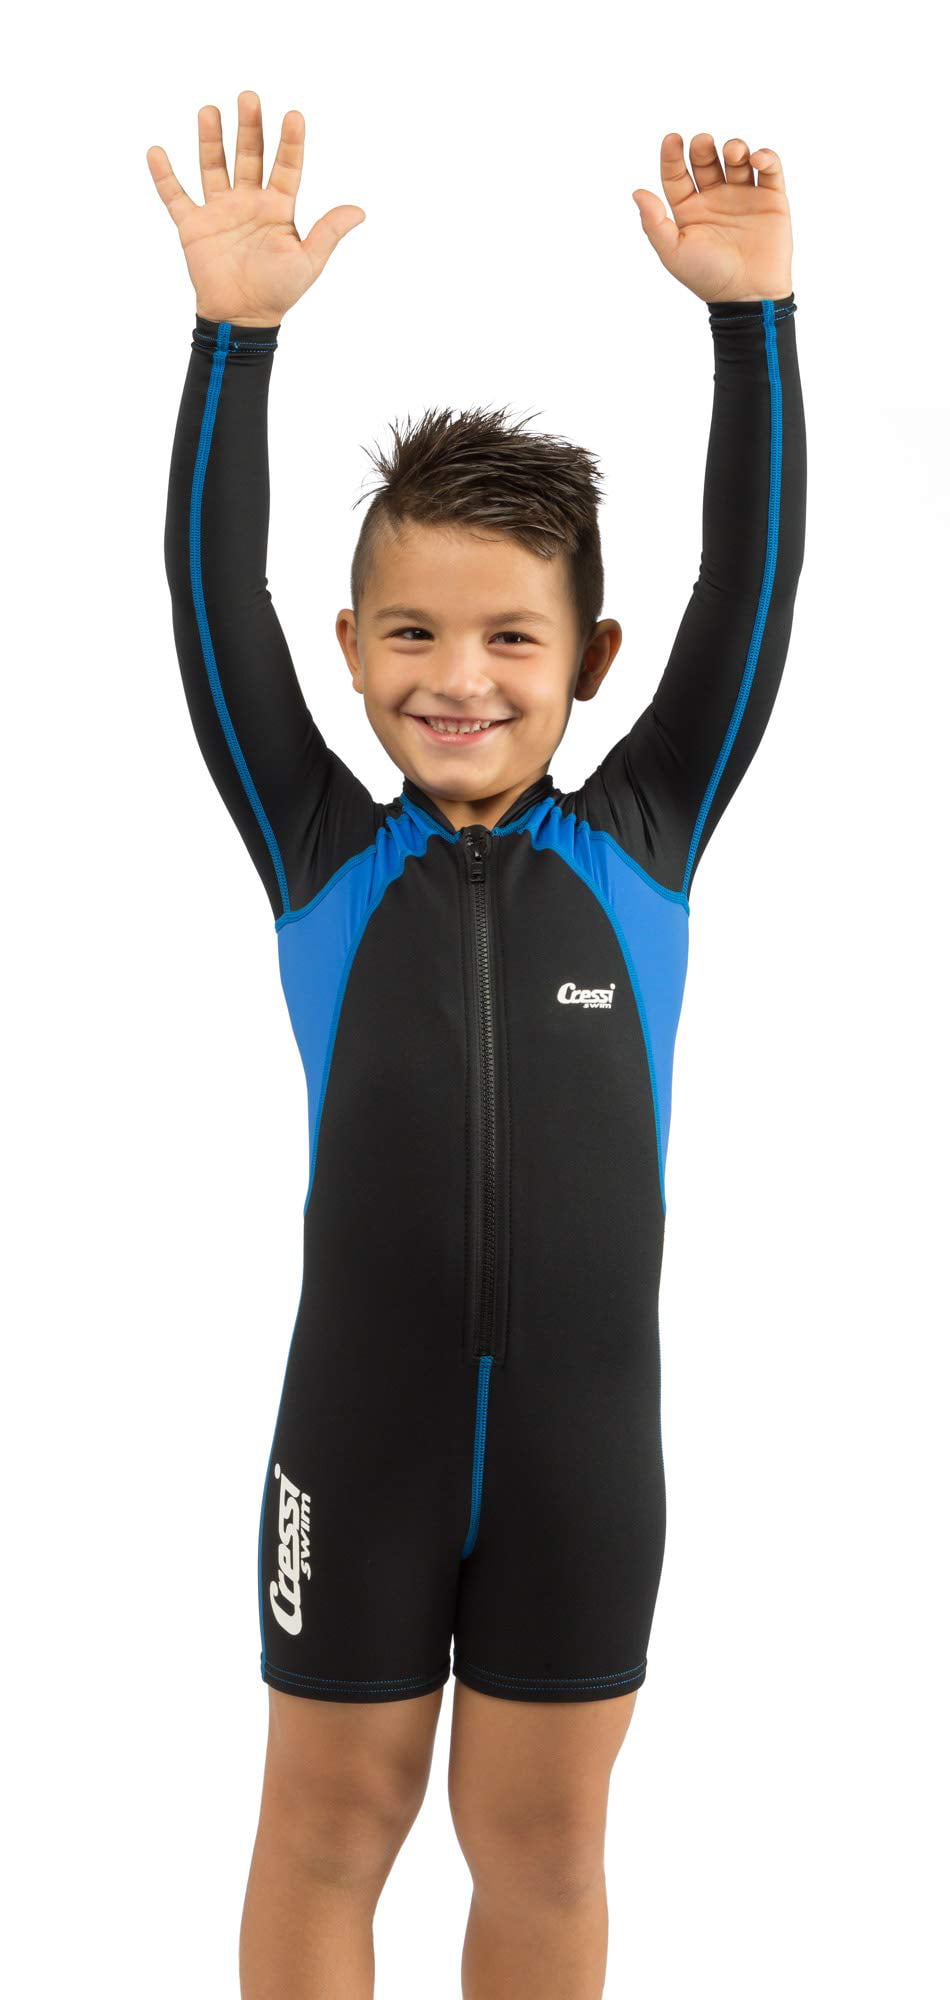 Cressi 1.5mm Neoprene One-Piece Long Sleeves Kids Swimsuit Shorty